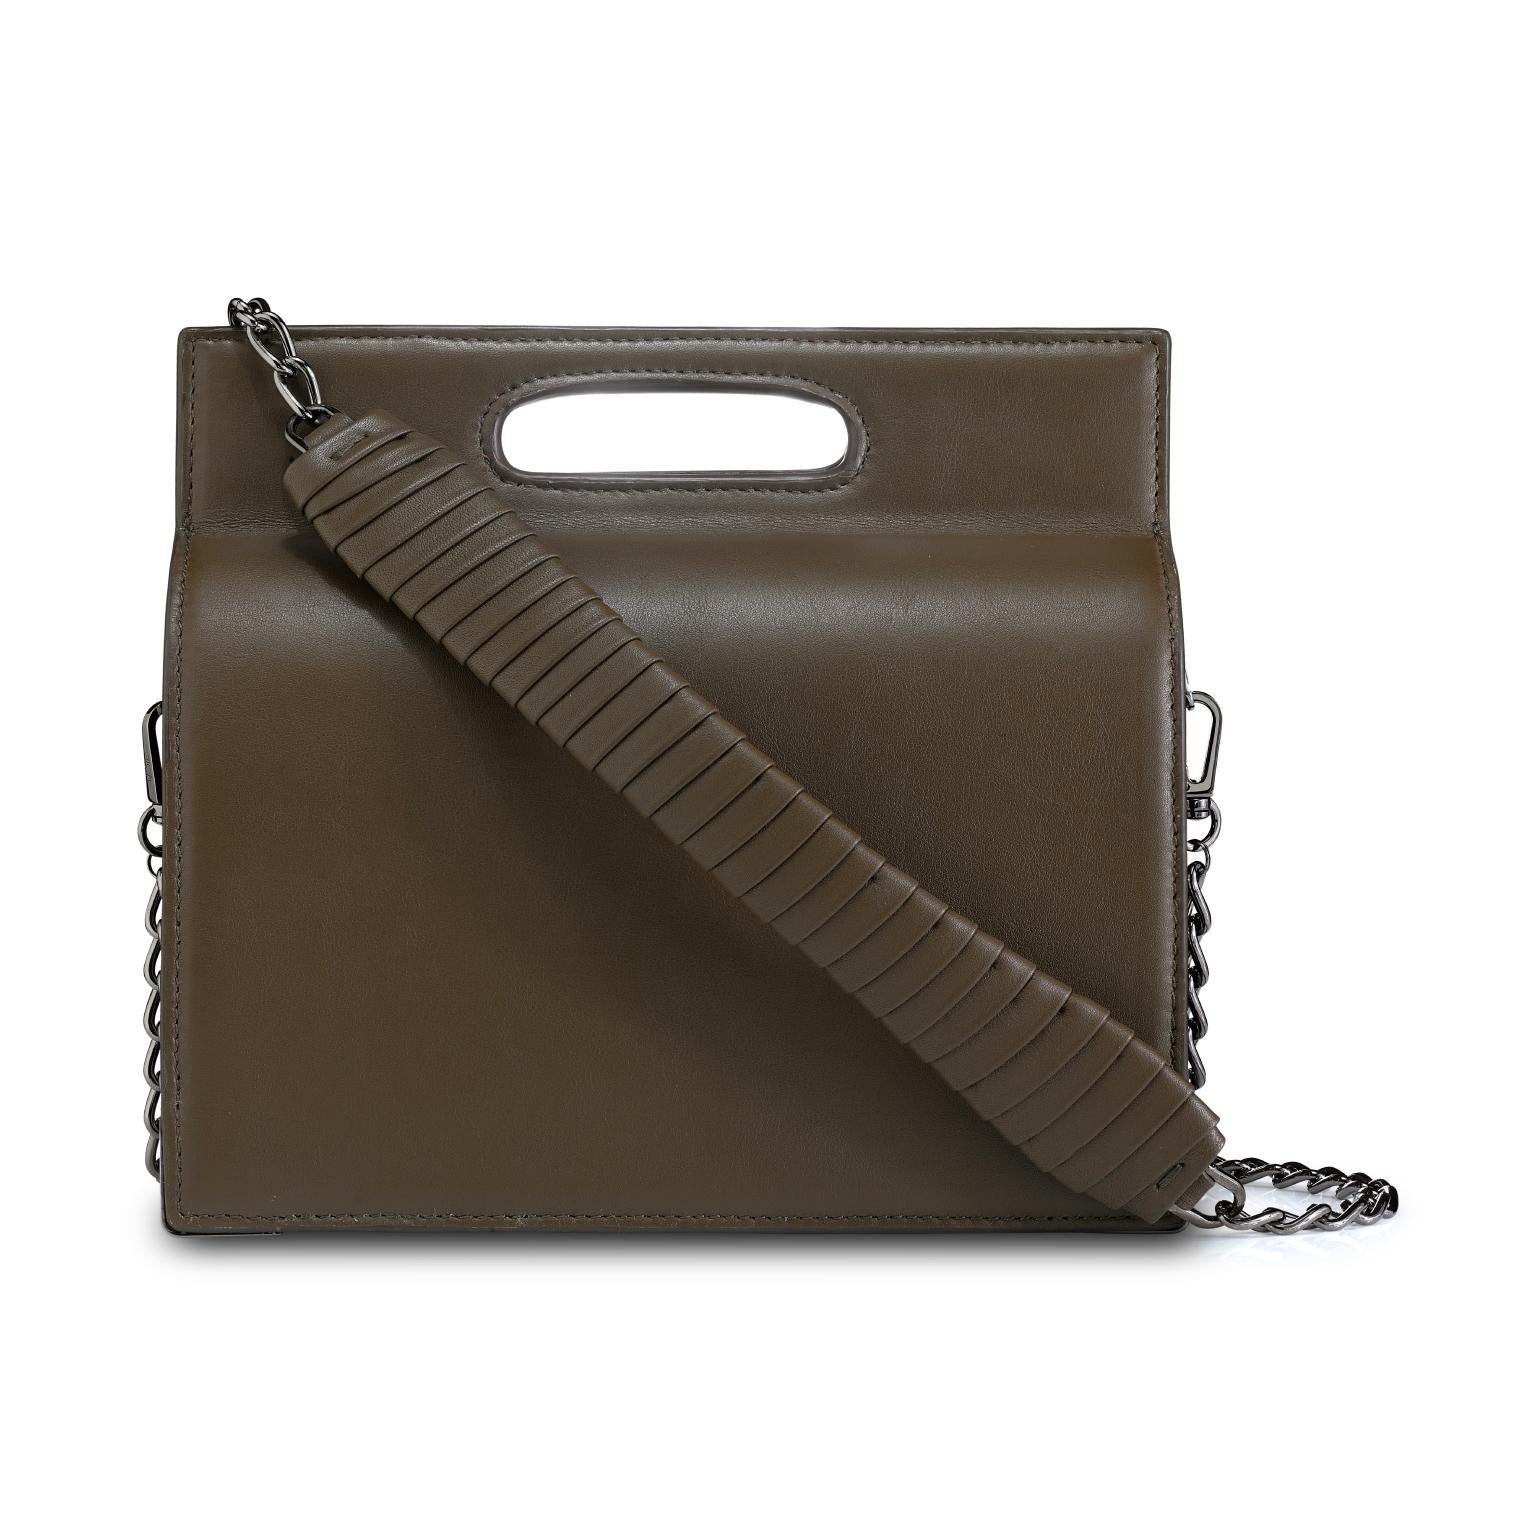 The Stella Handbag Tall is featured in Truffle Leather with gunmetal hardware. The Stella is a structured handbag with a magnetic closure and an optional cross-body chain with a leather-wrapped accent. It fits the large iPhone, has custom exterior